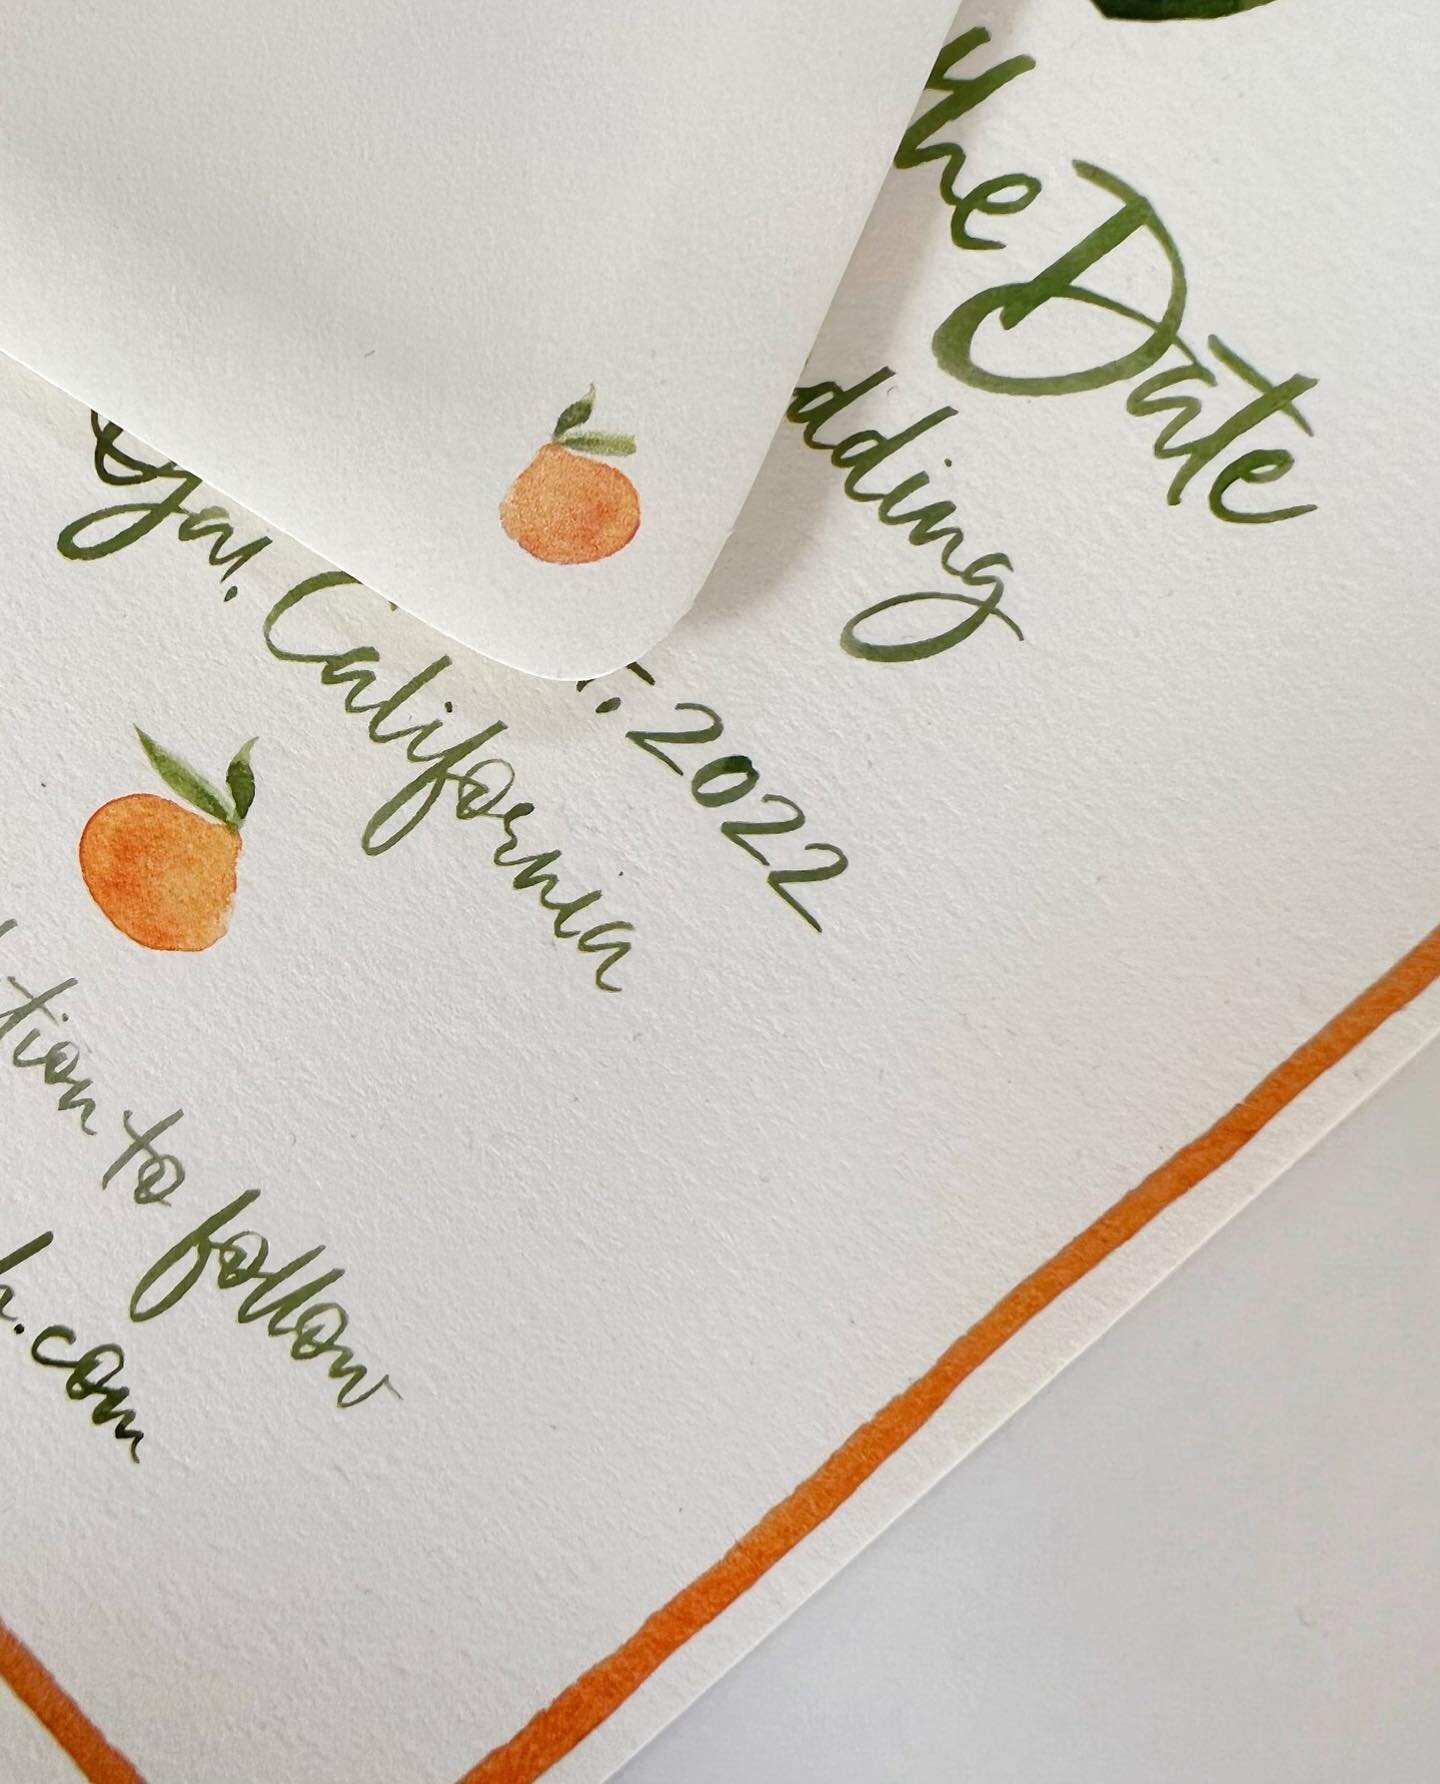 Repost @annerobincallig of a sneak of J&amp;J&rsquo;s darling watercolor save the dates that went out earlier this year. It&rsquo;s not Ojai with homage to the pixie 🍊
Time to chat invites! 💌